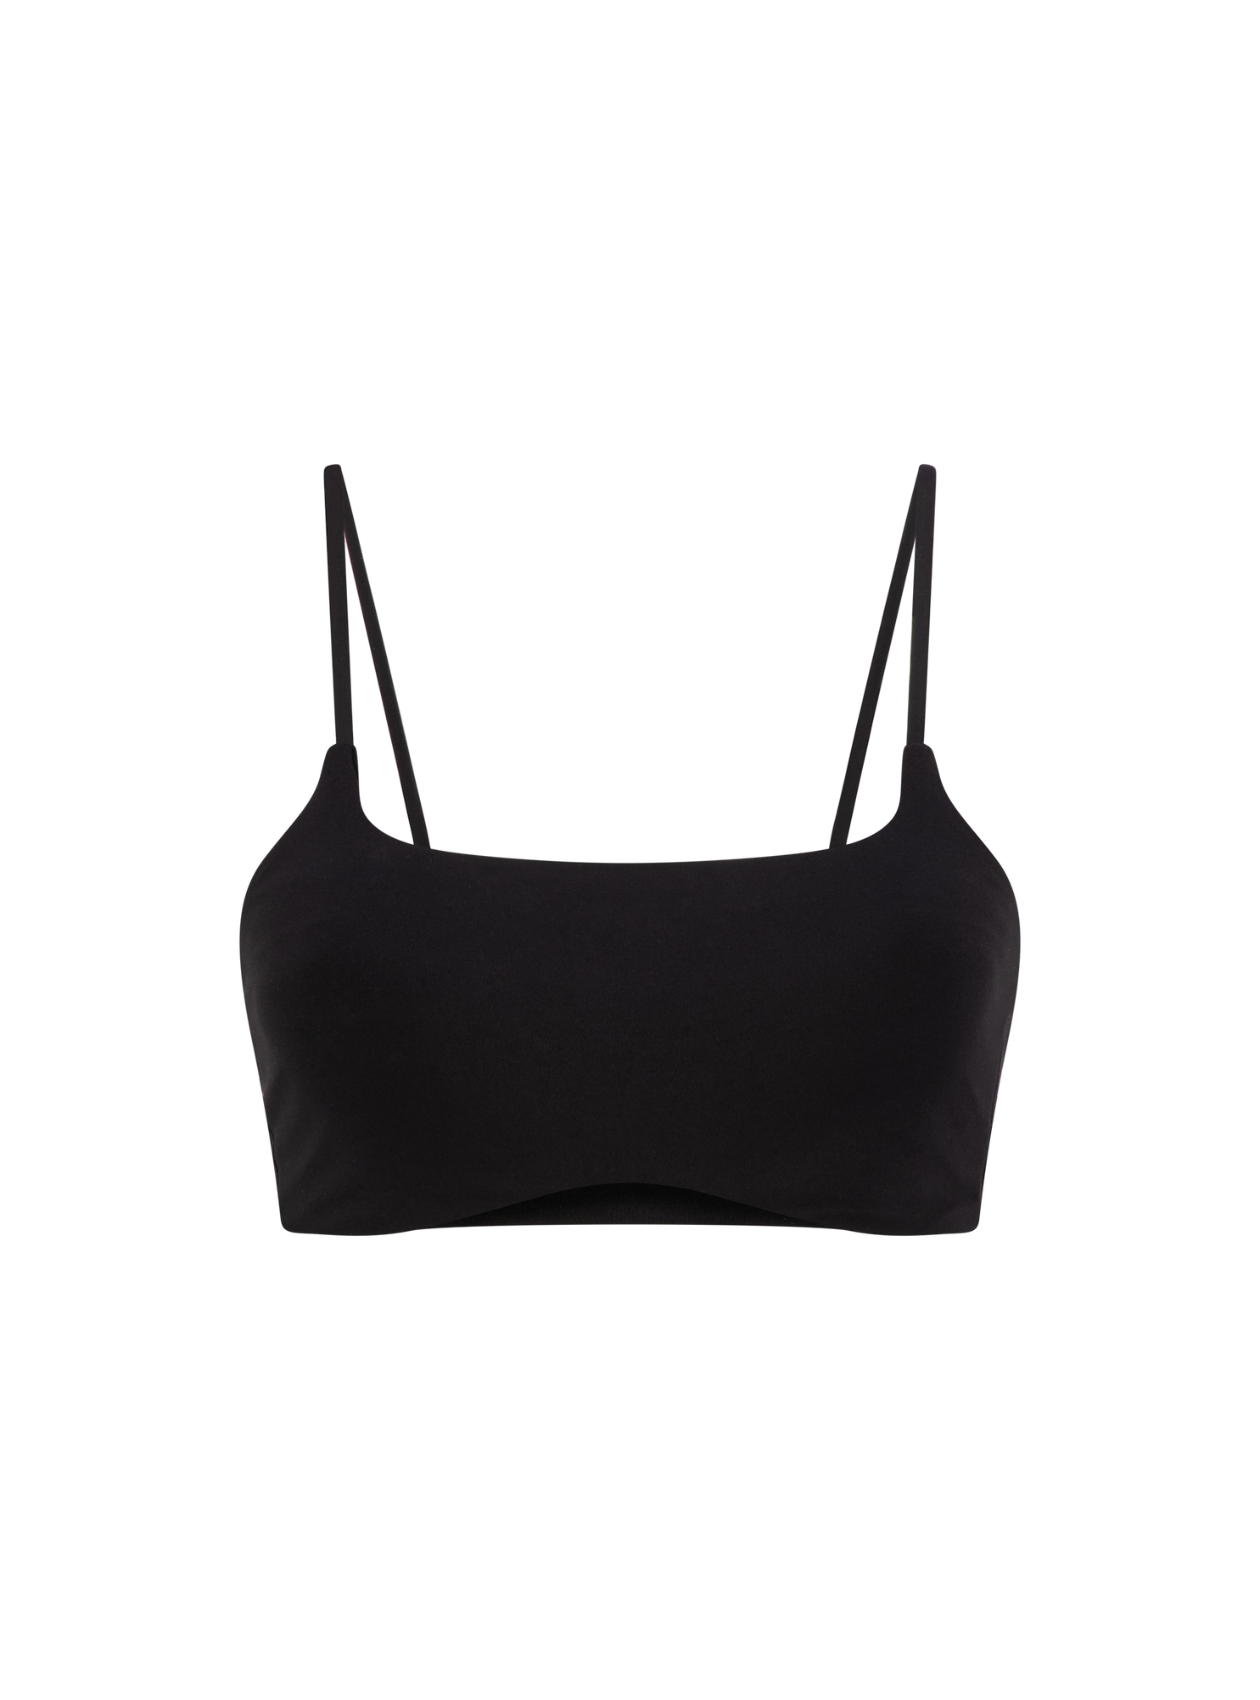 Artesands Sculpt Control Bikini Top BLACK buy for the best price CAD$  160.00 - Canada and U.S. delivery – Bralissimo